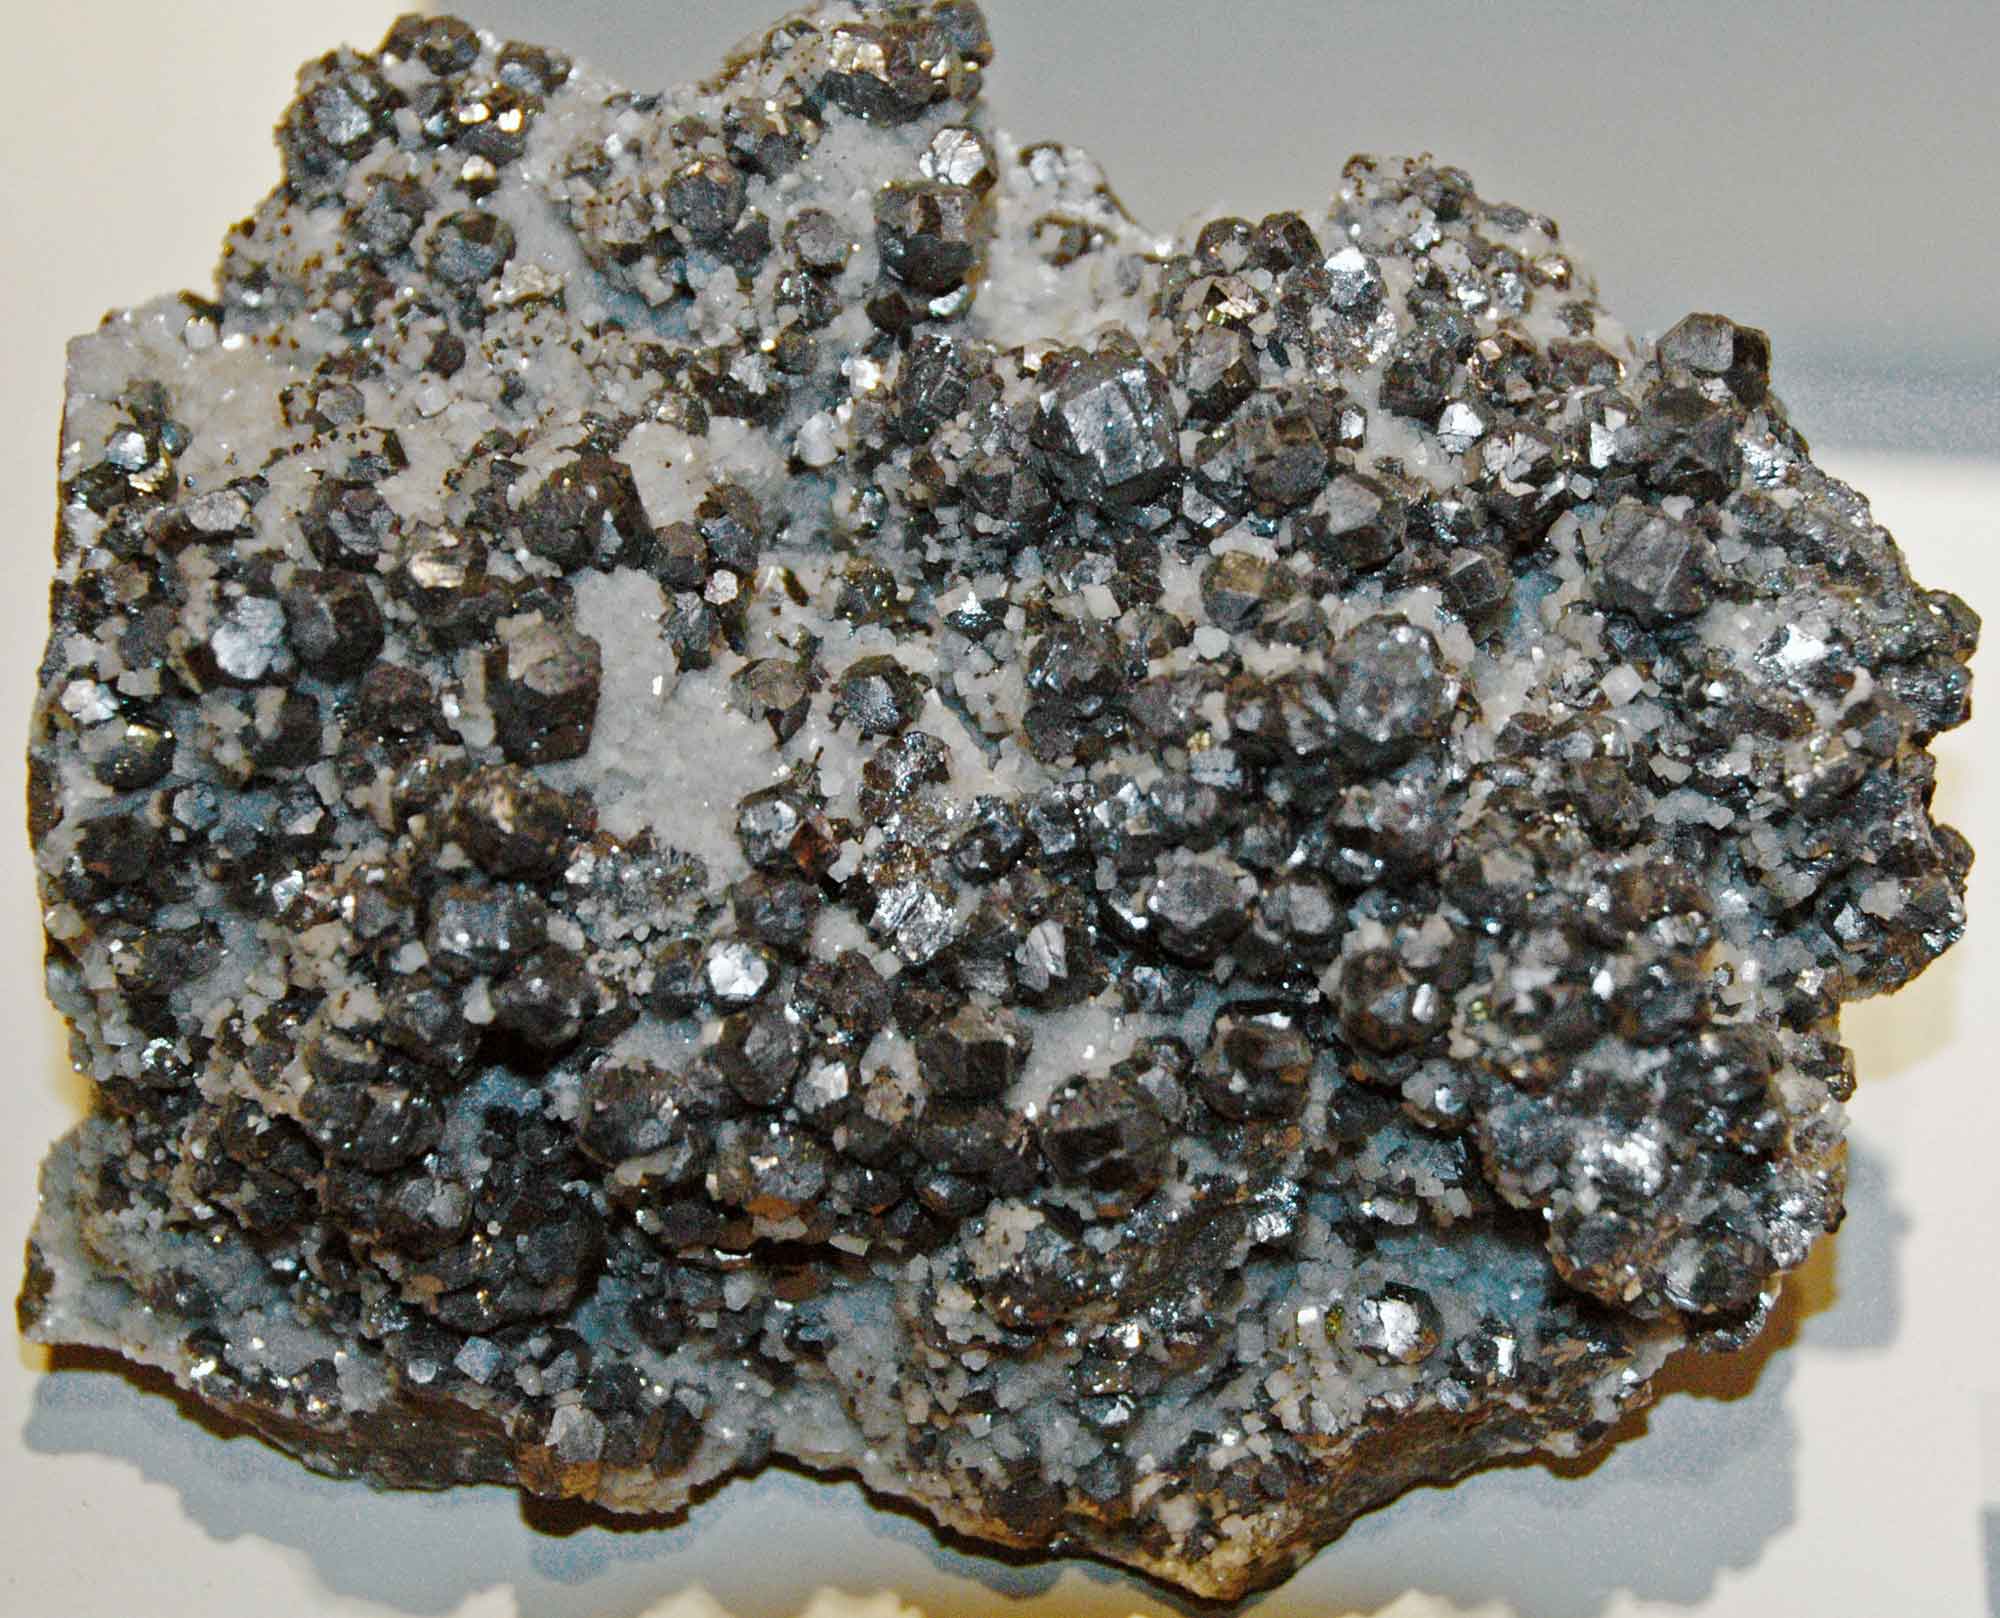 Photograph of a sample of galena from Kansas.